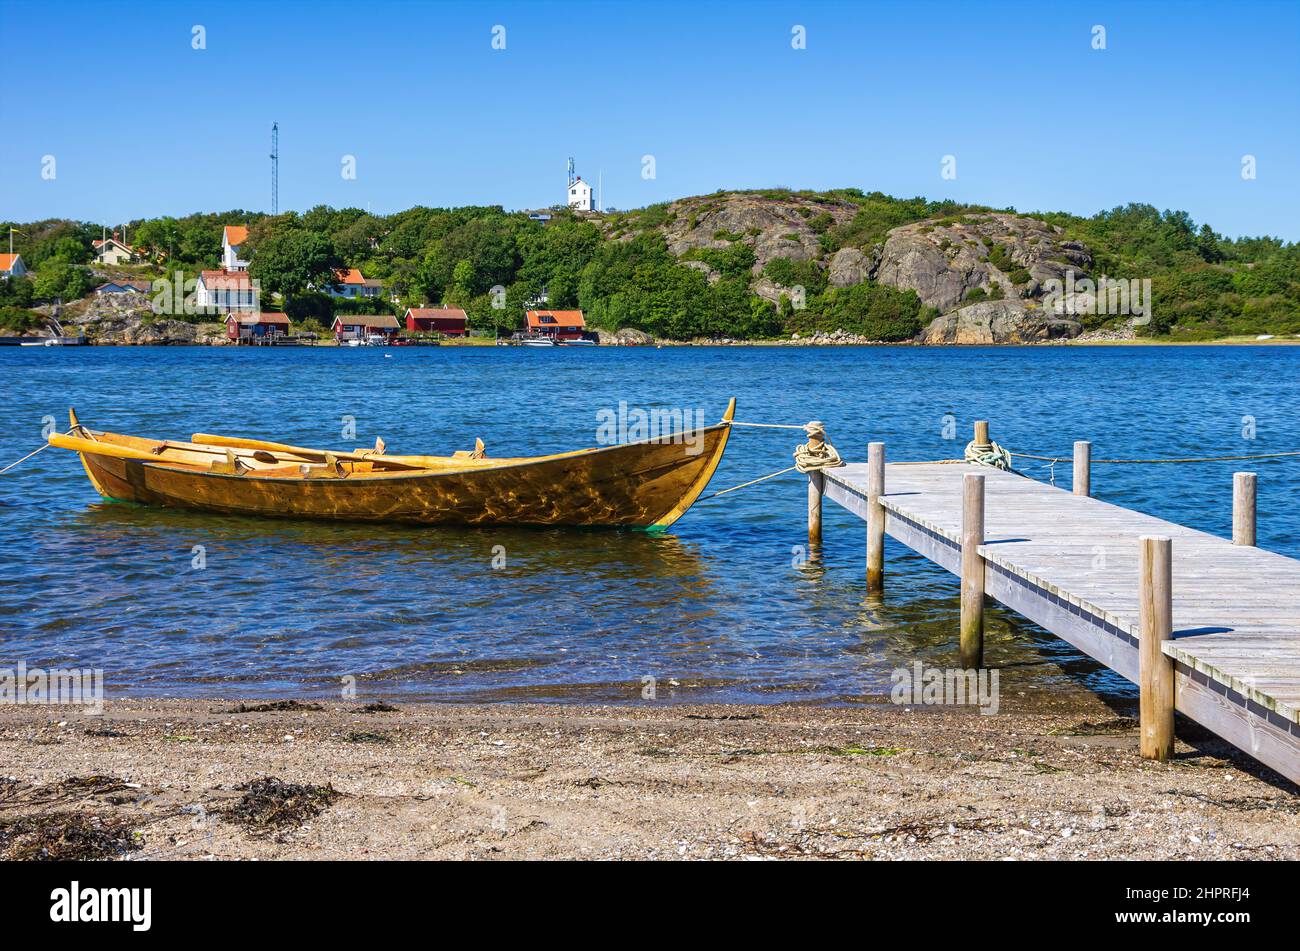 Single rowboat at a landing stage on the North shore of the South Koster Island with a beautiful view of the North Koster Island, Sweden. Stock Photo